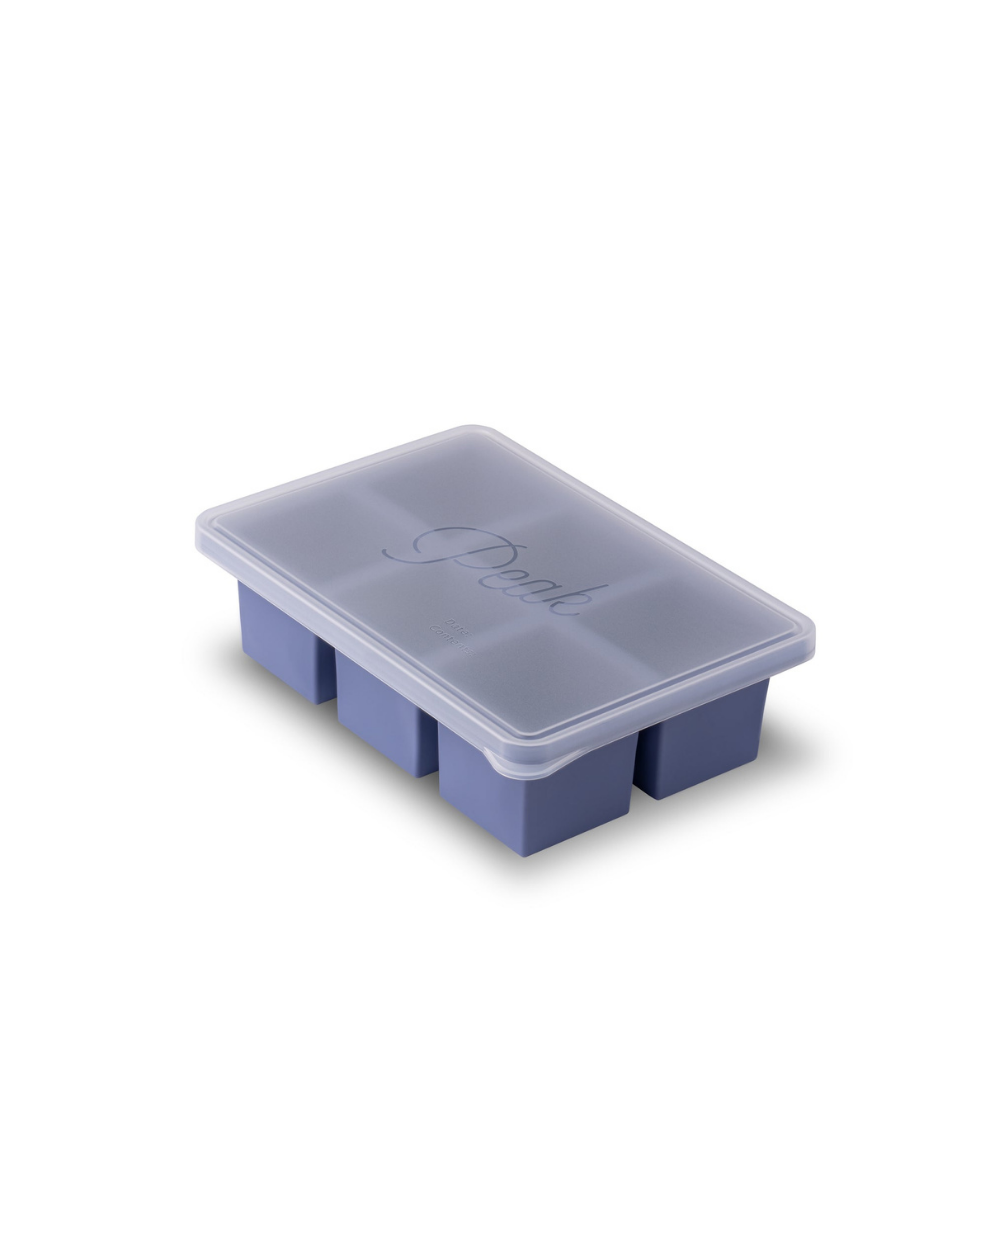 Set of Silicone Ice Cube Trays Makes 8 Large 2 in. x 2 in. Cubes Each